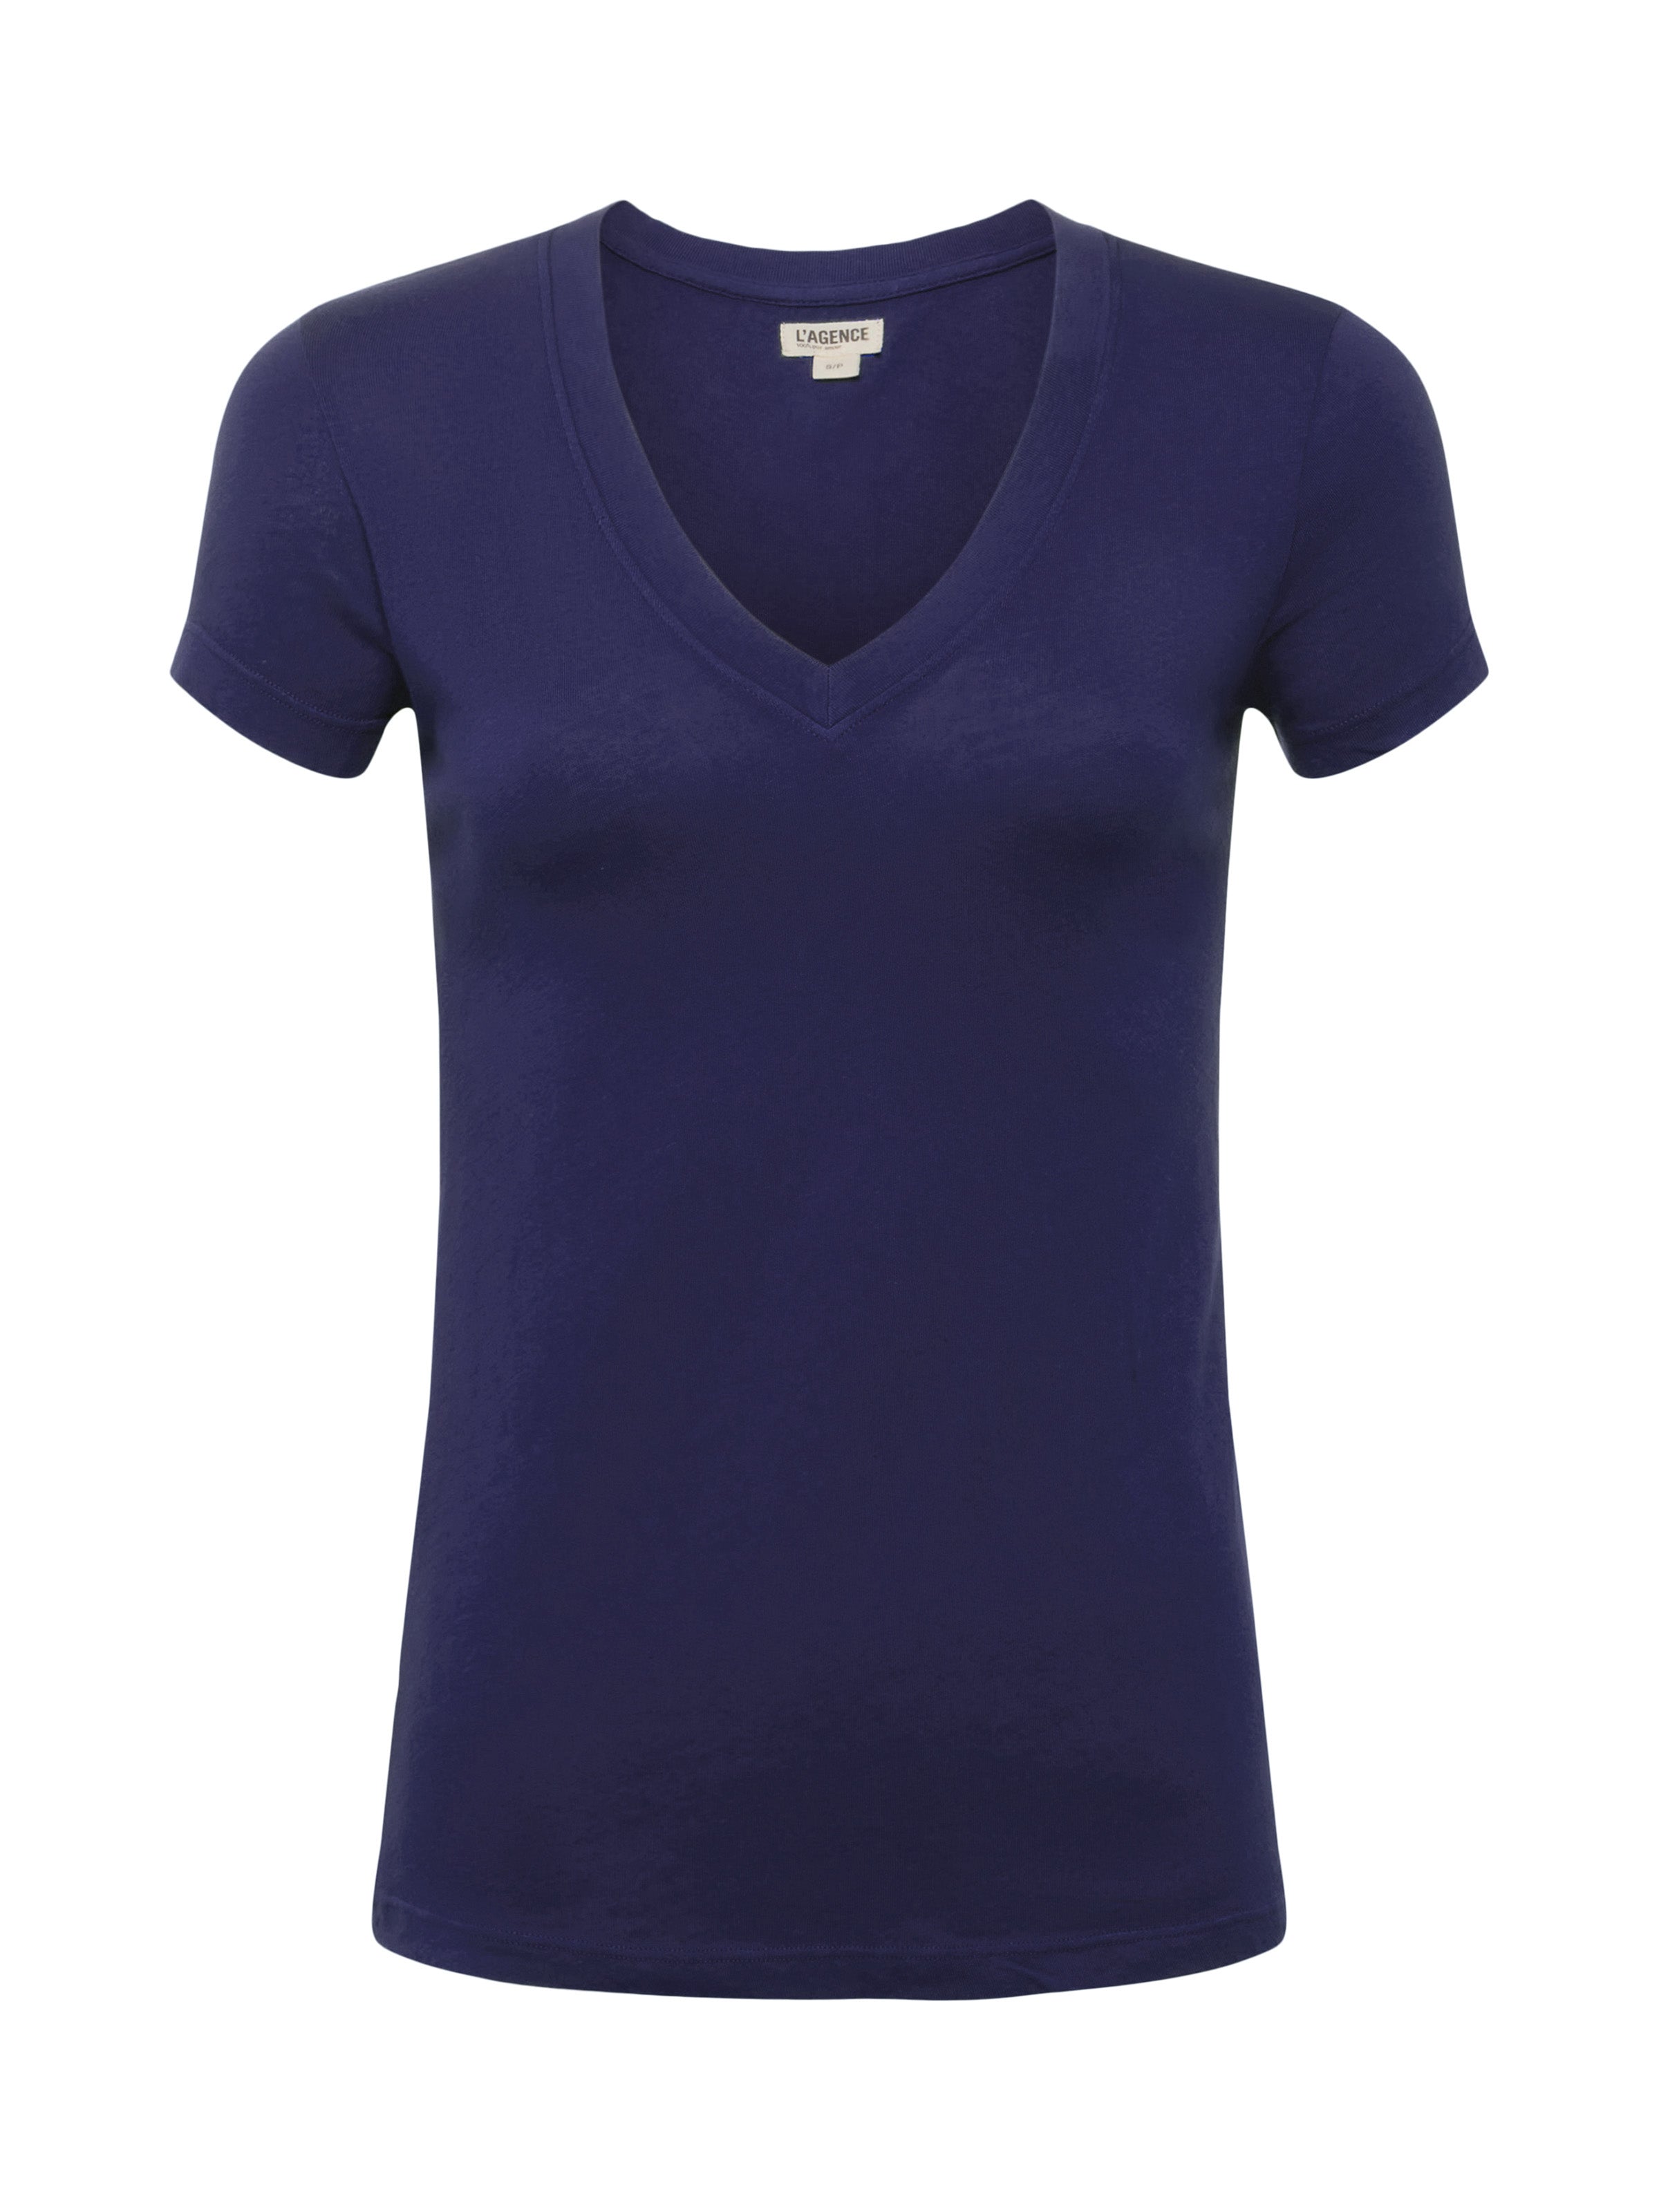 L'AGENCE Becca Tee In Navy